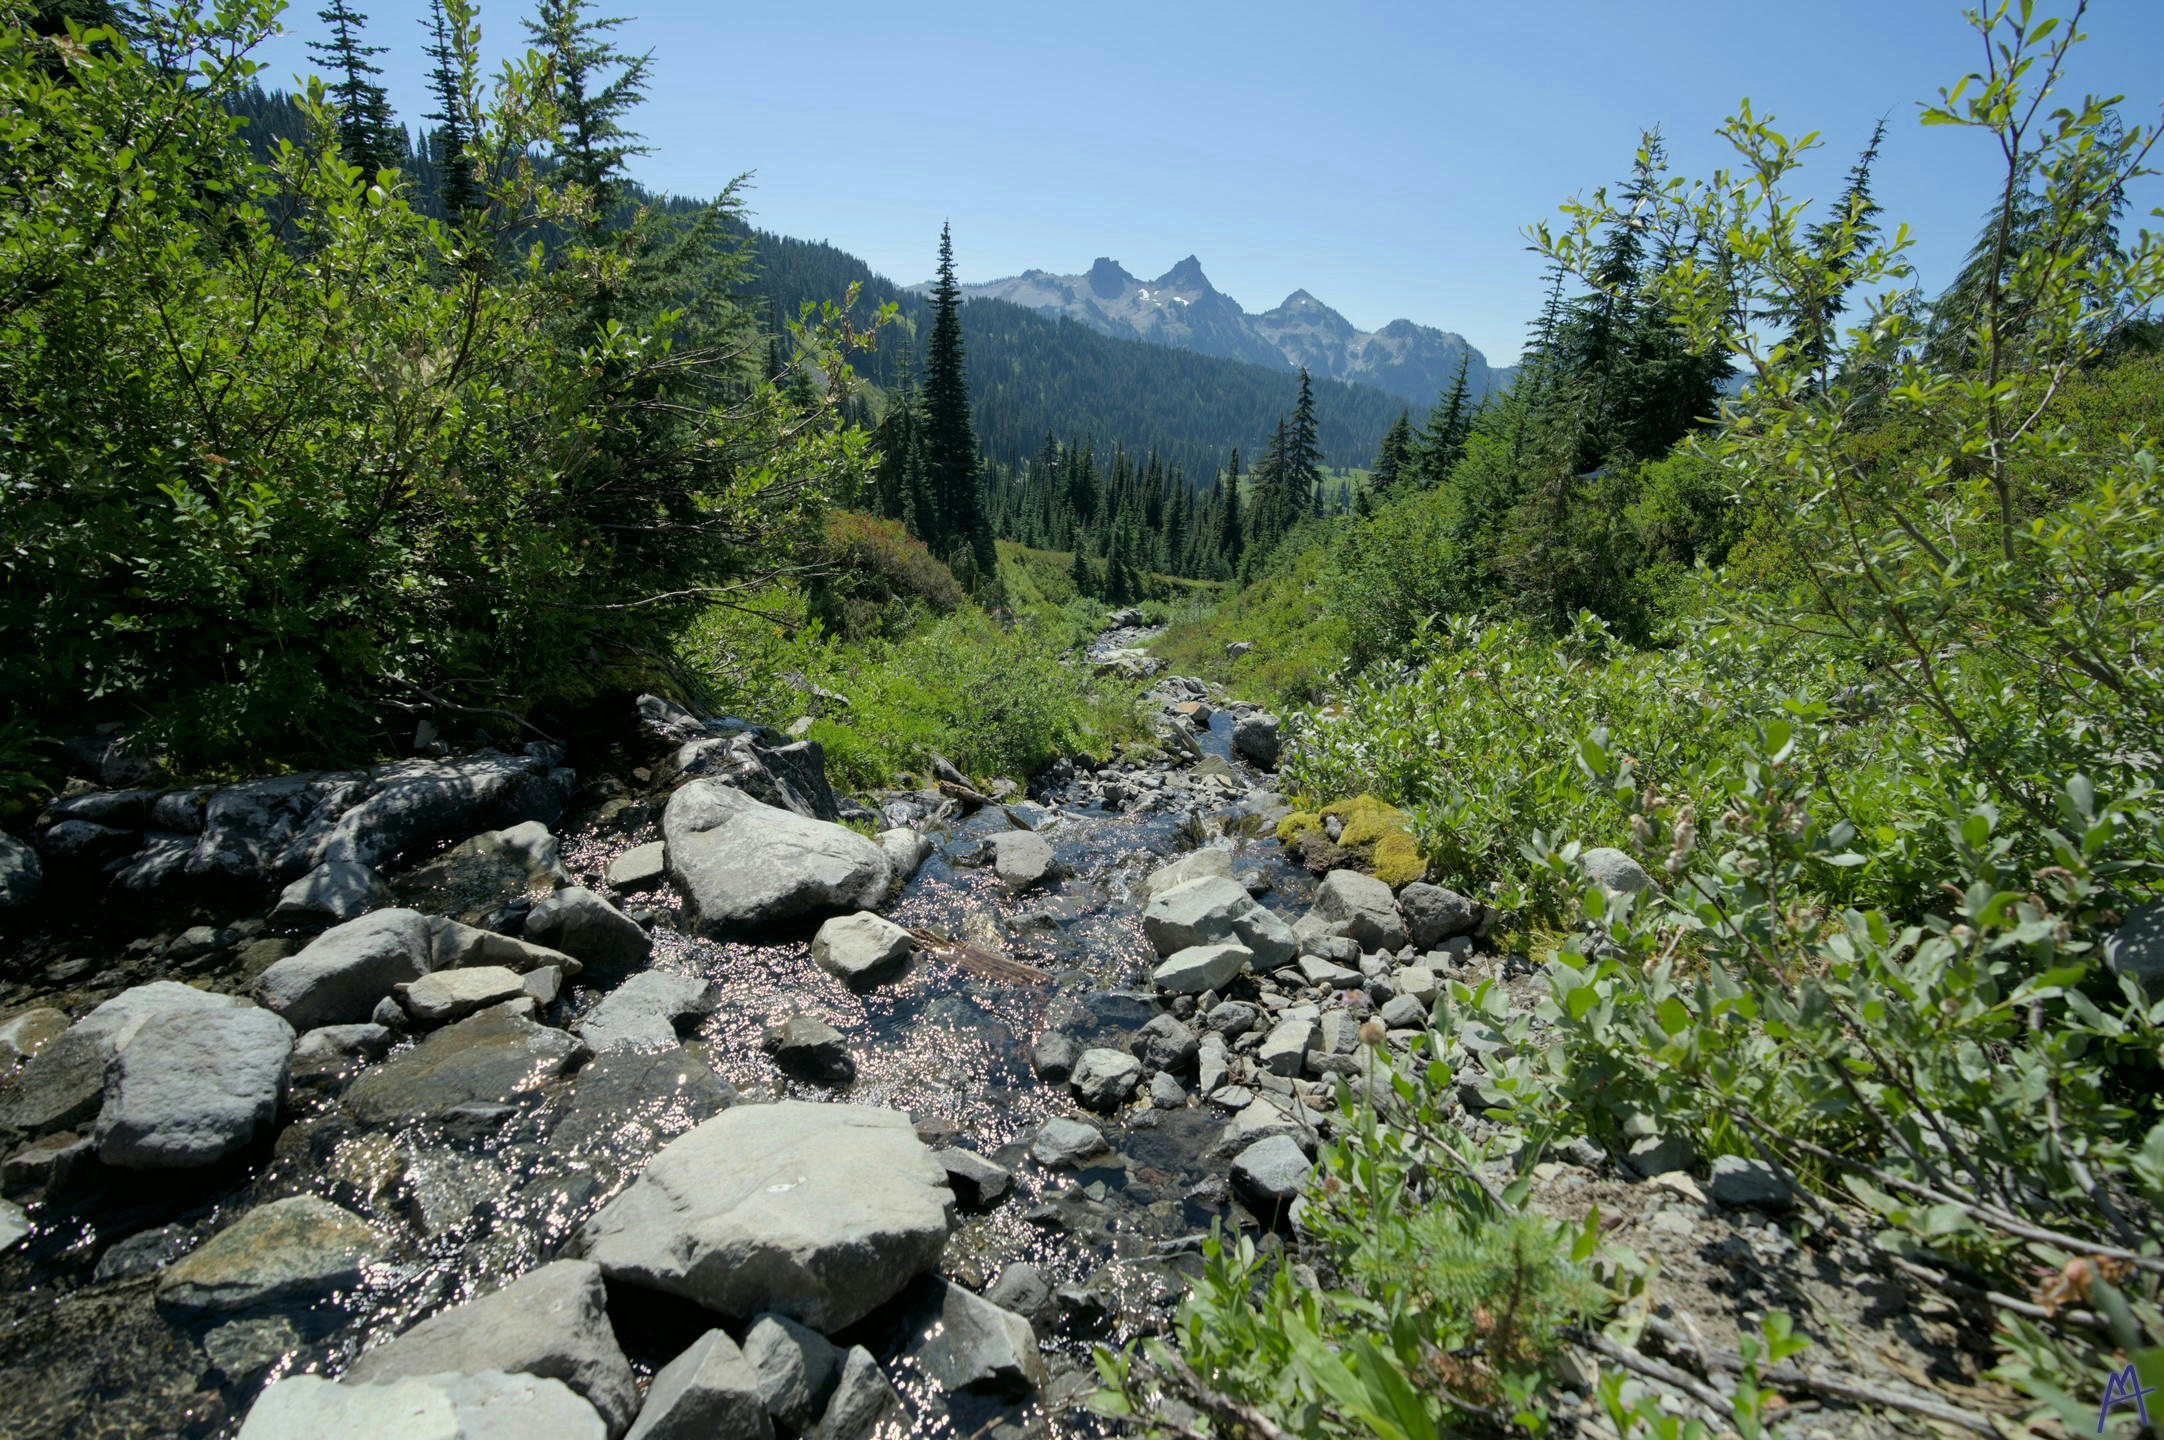 A creek flowing down rocks through some bushes with mountains in the background at Rainier